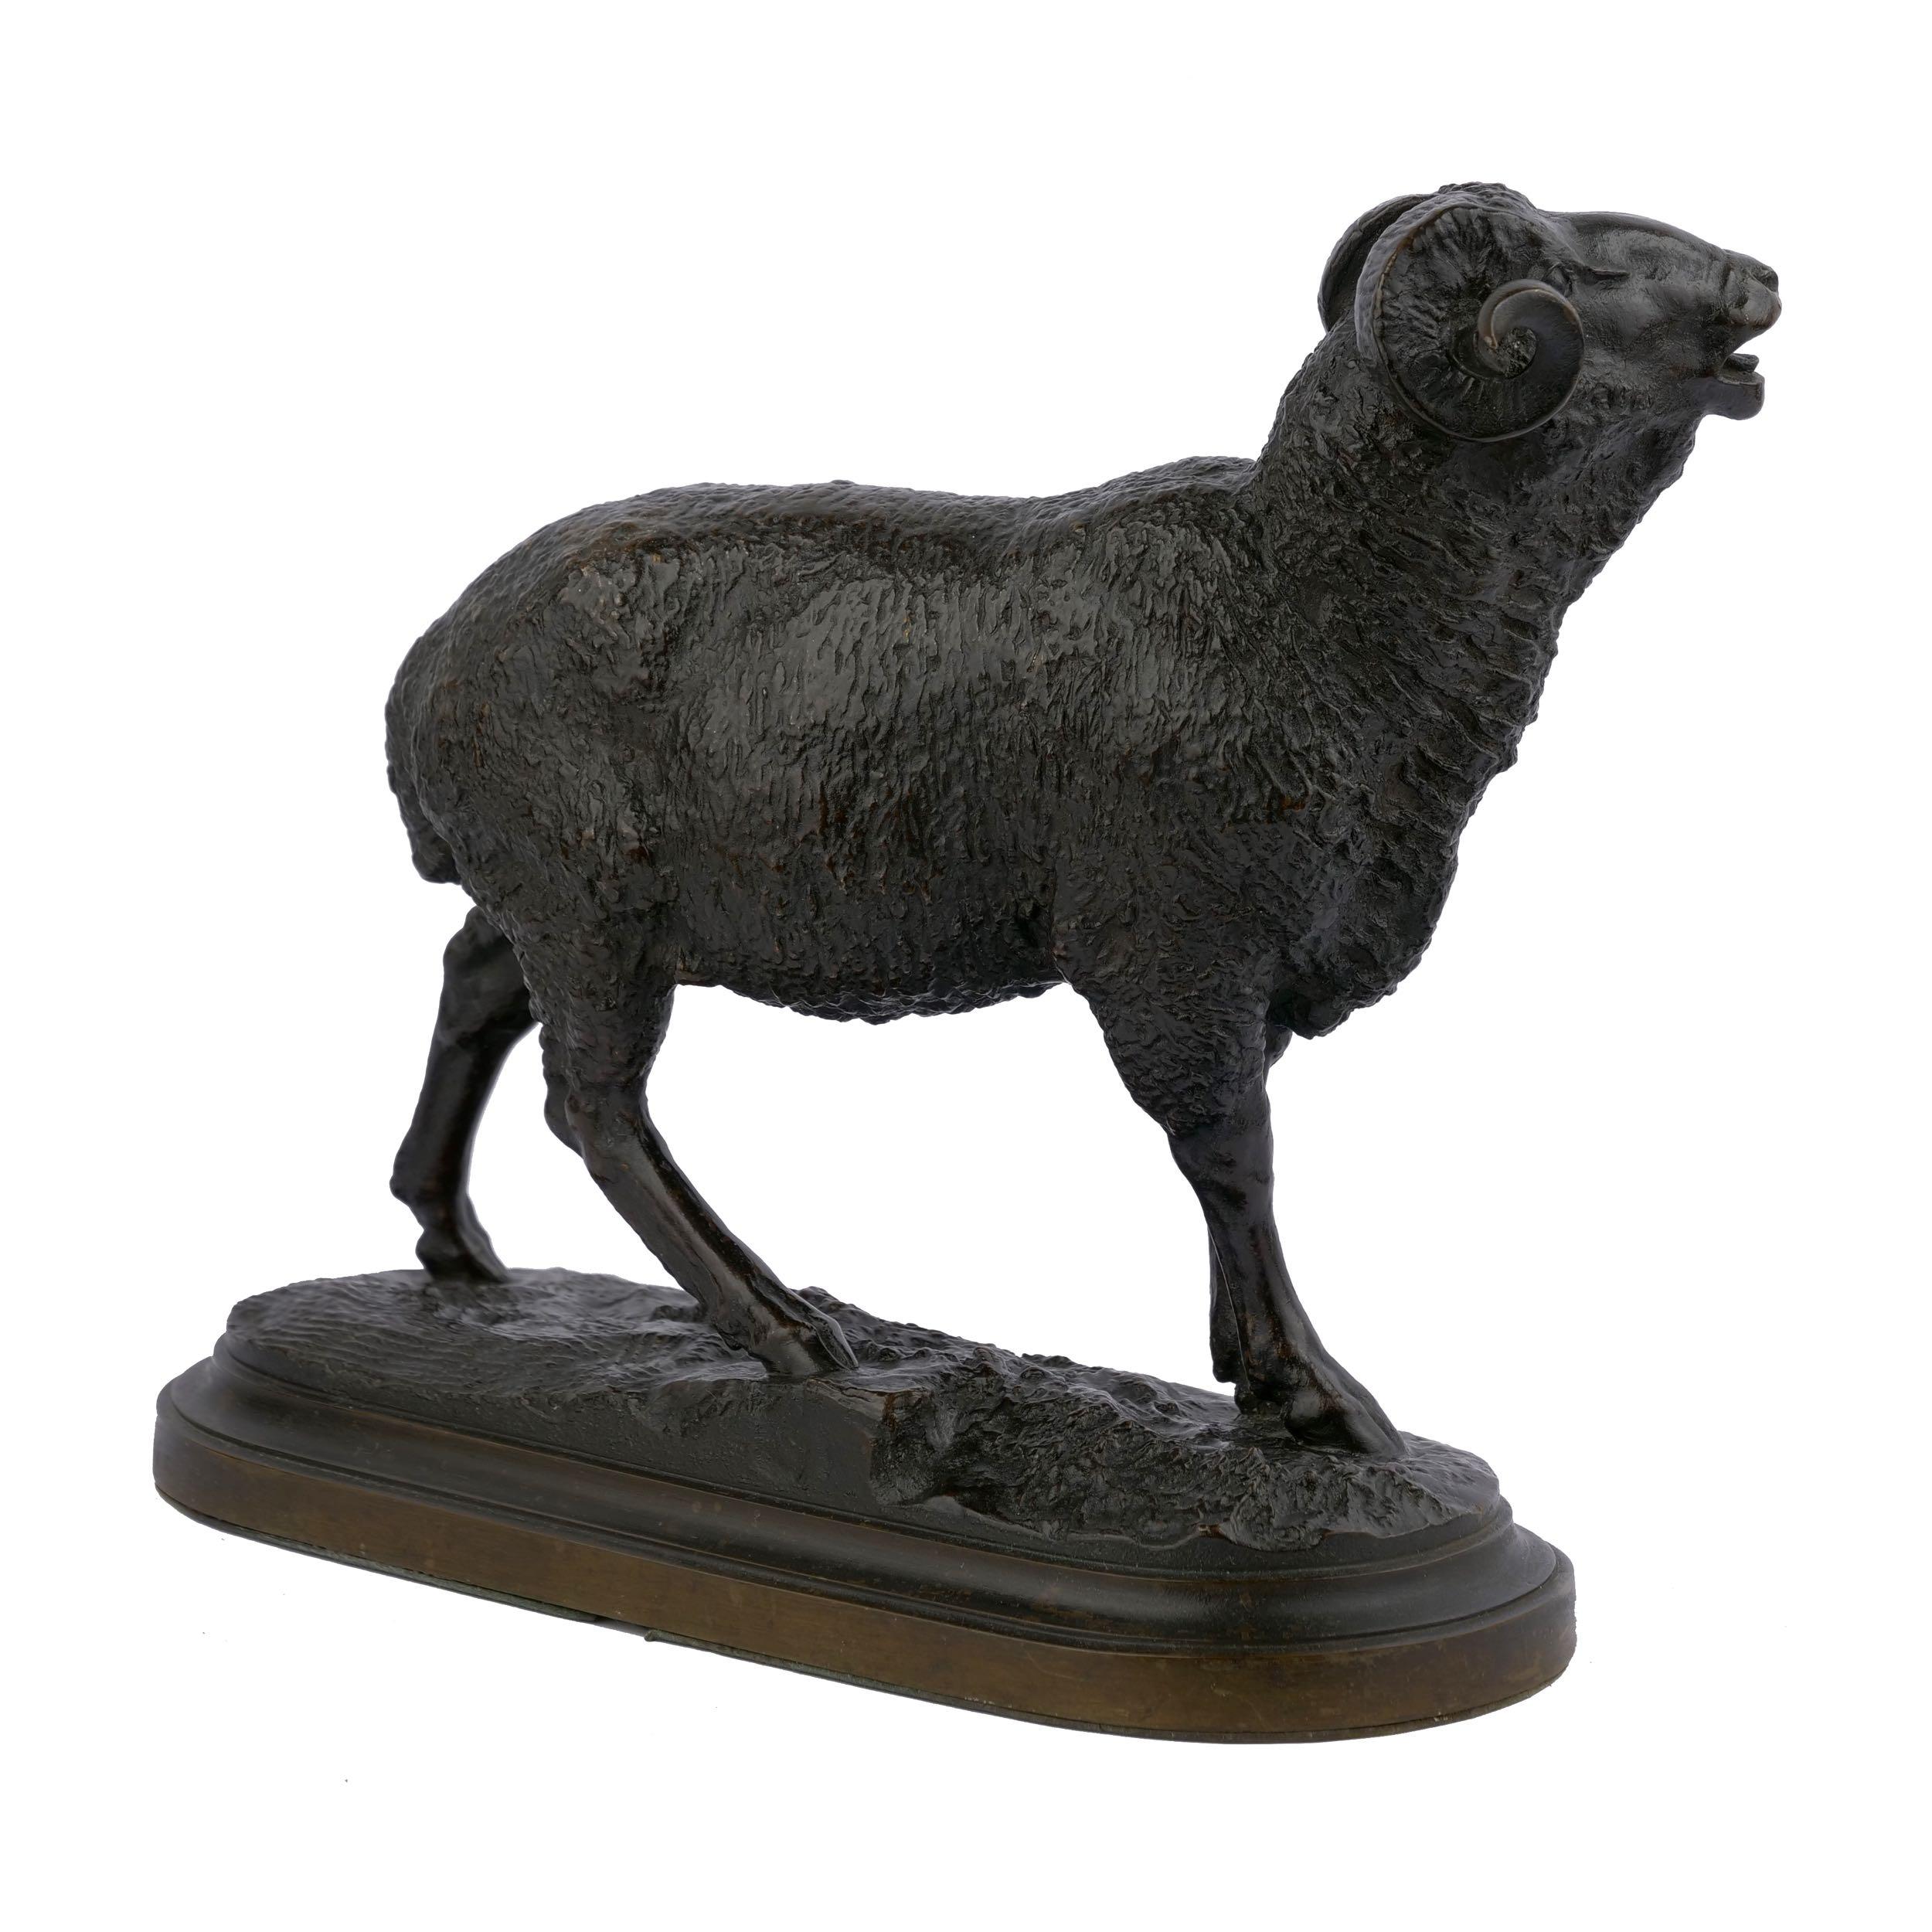 An exquisite casting of Merino Ram, our gallery handled Isidore Bonheur's other variation of this model which was a group combined as Merino Ram and Ewe. Both sculptures that made up that group were recently acquired by our shop and Merino Ewe may